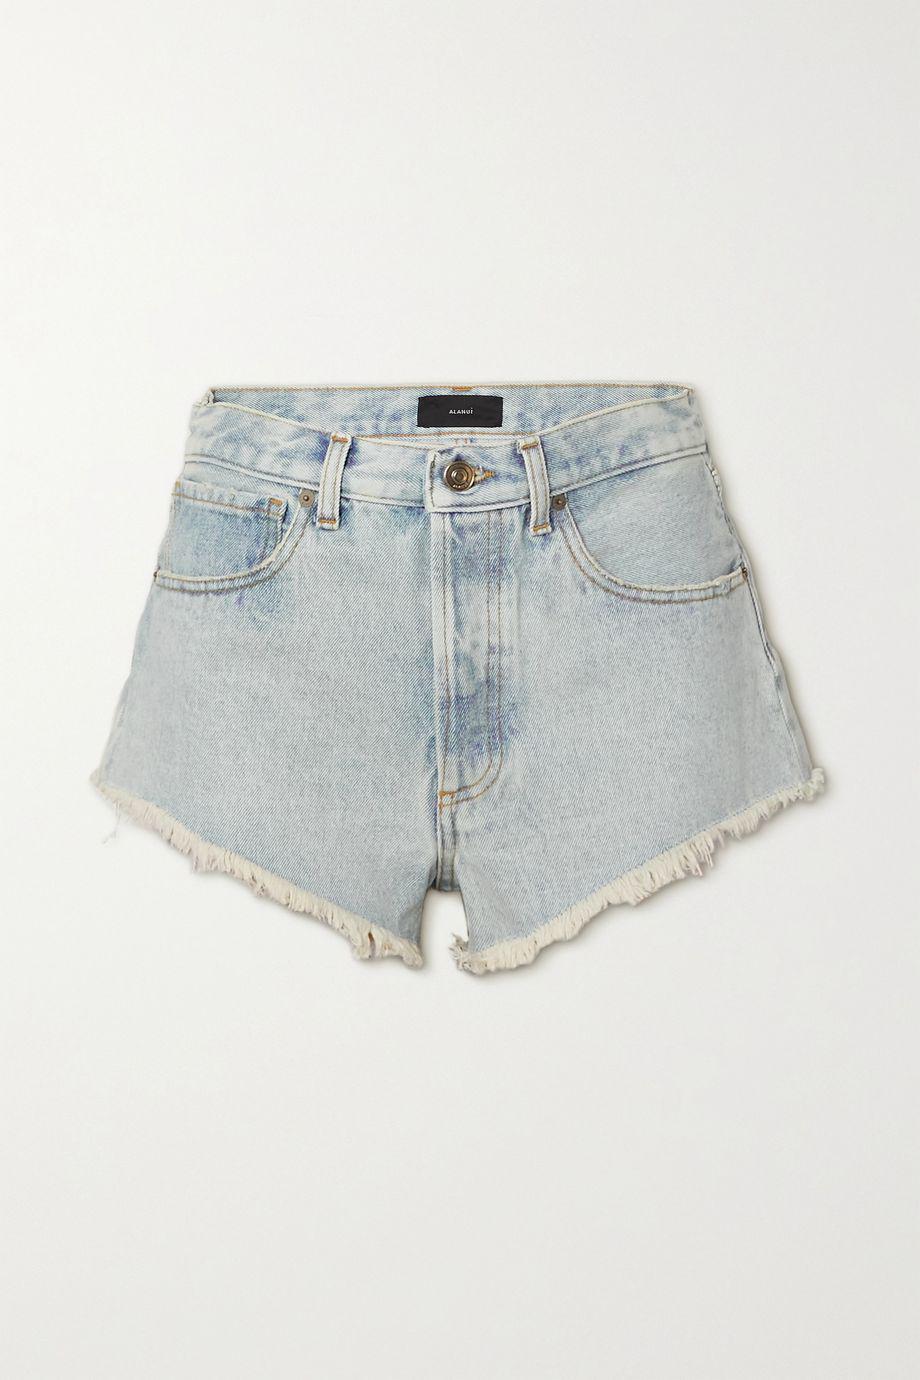 Northern Vibes fringed crochet-embroidered denim shorts by ALANUI